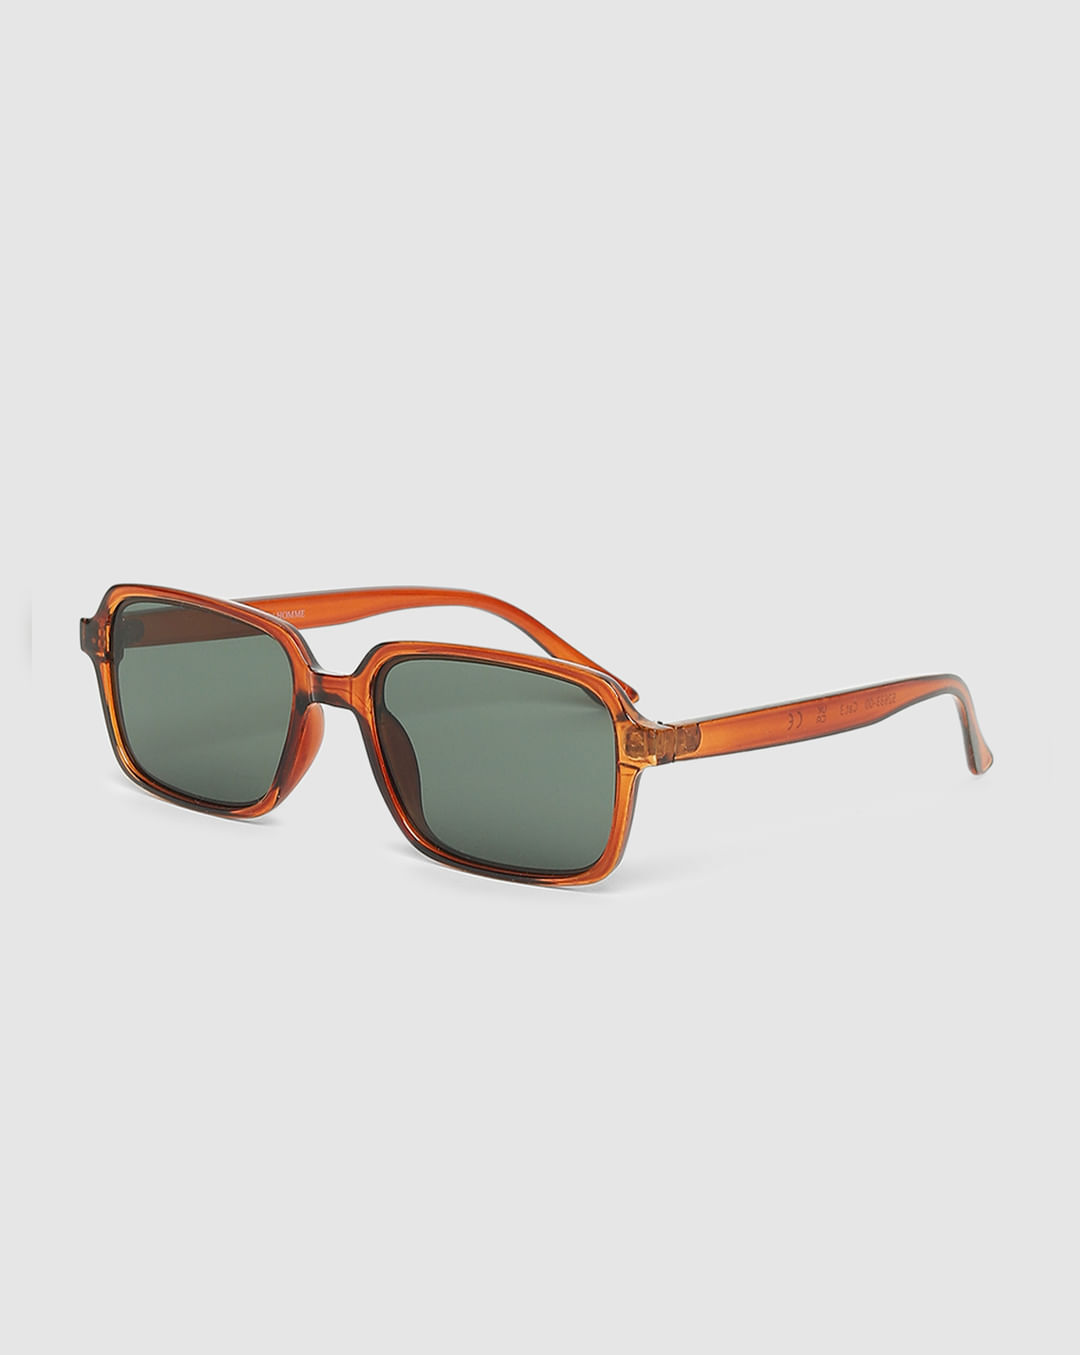 SELECTED HOMME Brown Rectangular Sunglasses